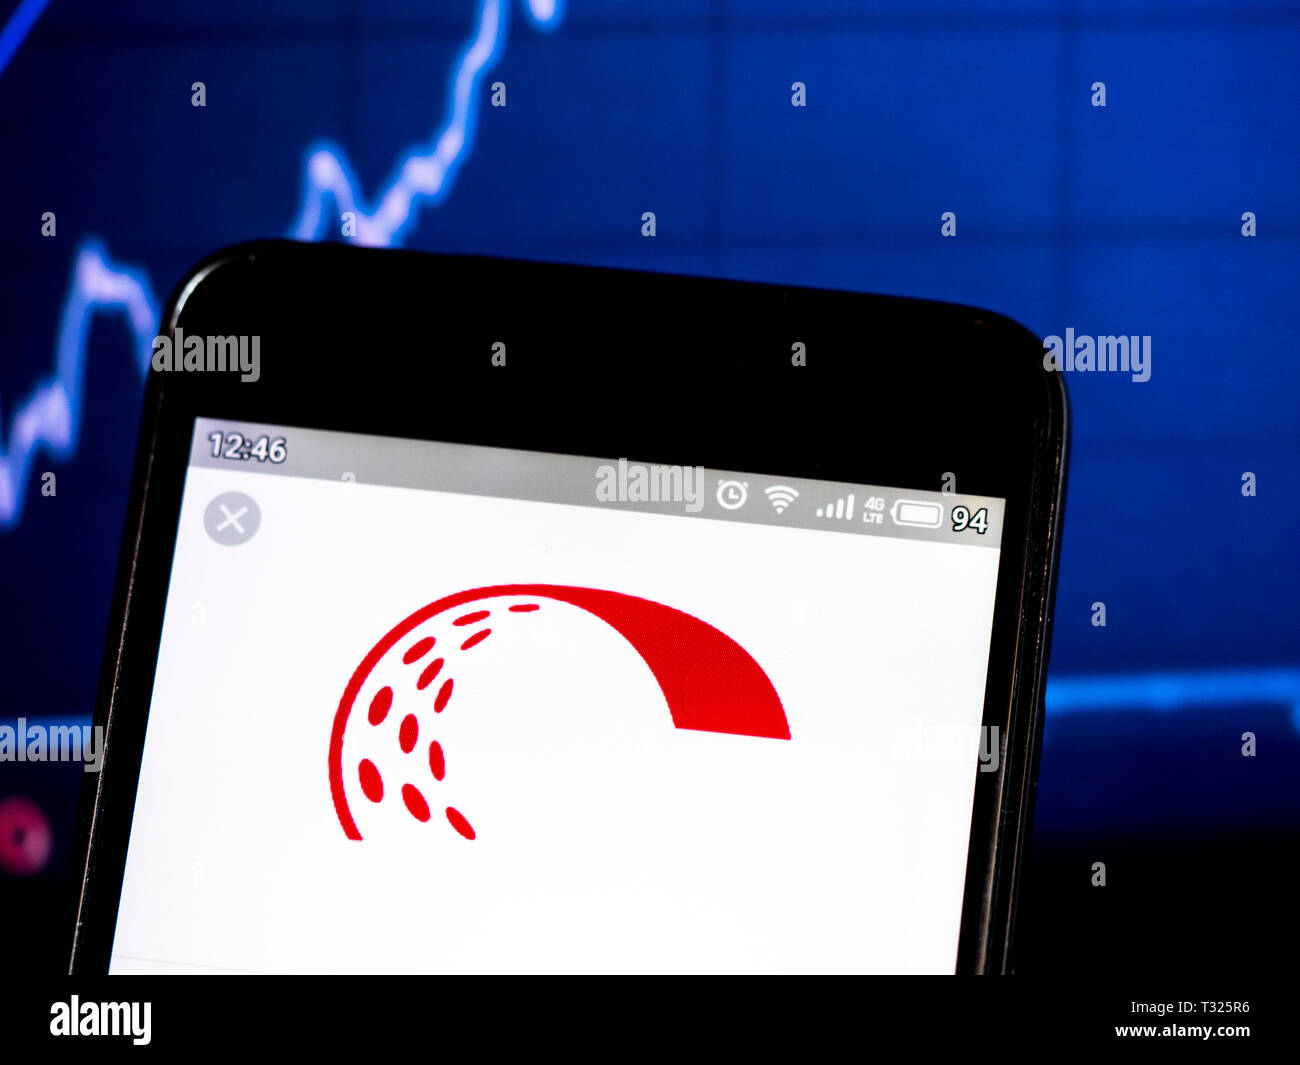 In this photo illustration an Actelion Pharmaceuticals Ltd. logo seen displayed on a smart phone Stock Photo